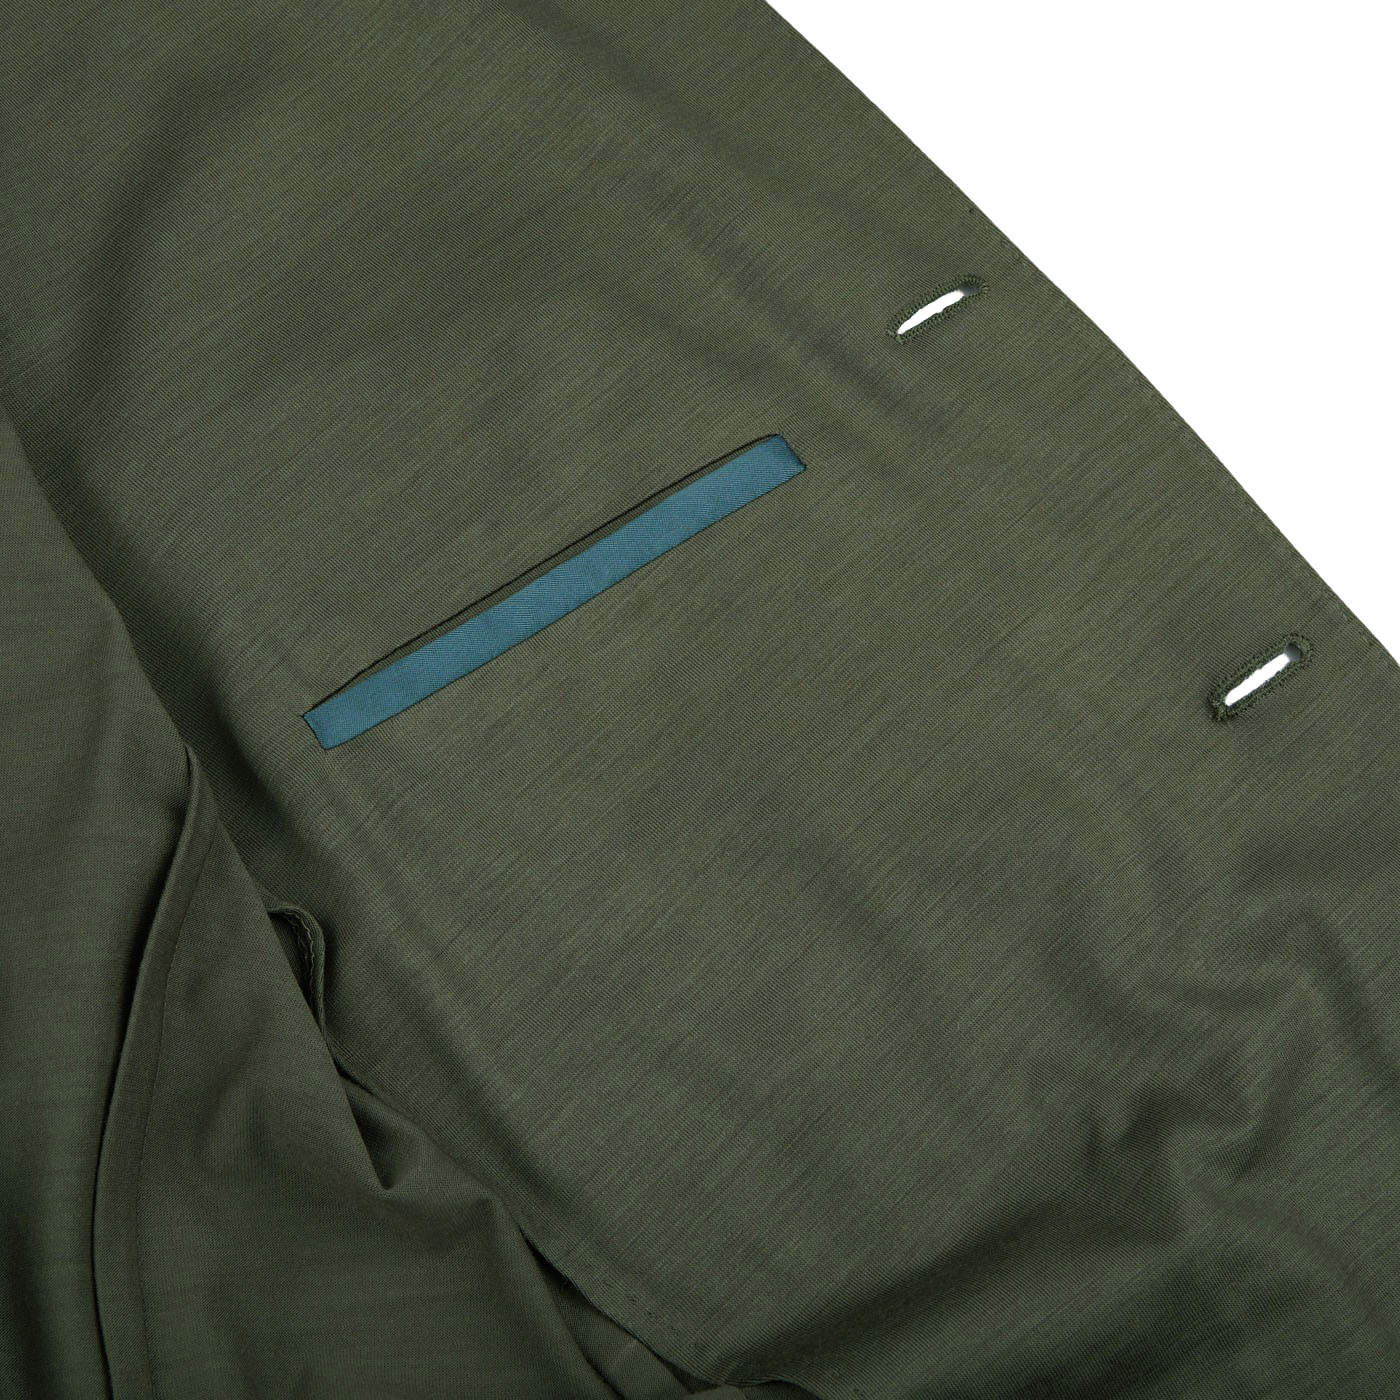 A close up of a Boglioli Dark Green Wool Jersey K Jacket with a blue pocket, featuring unstructured craftsmanship.